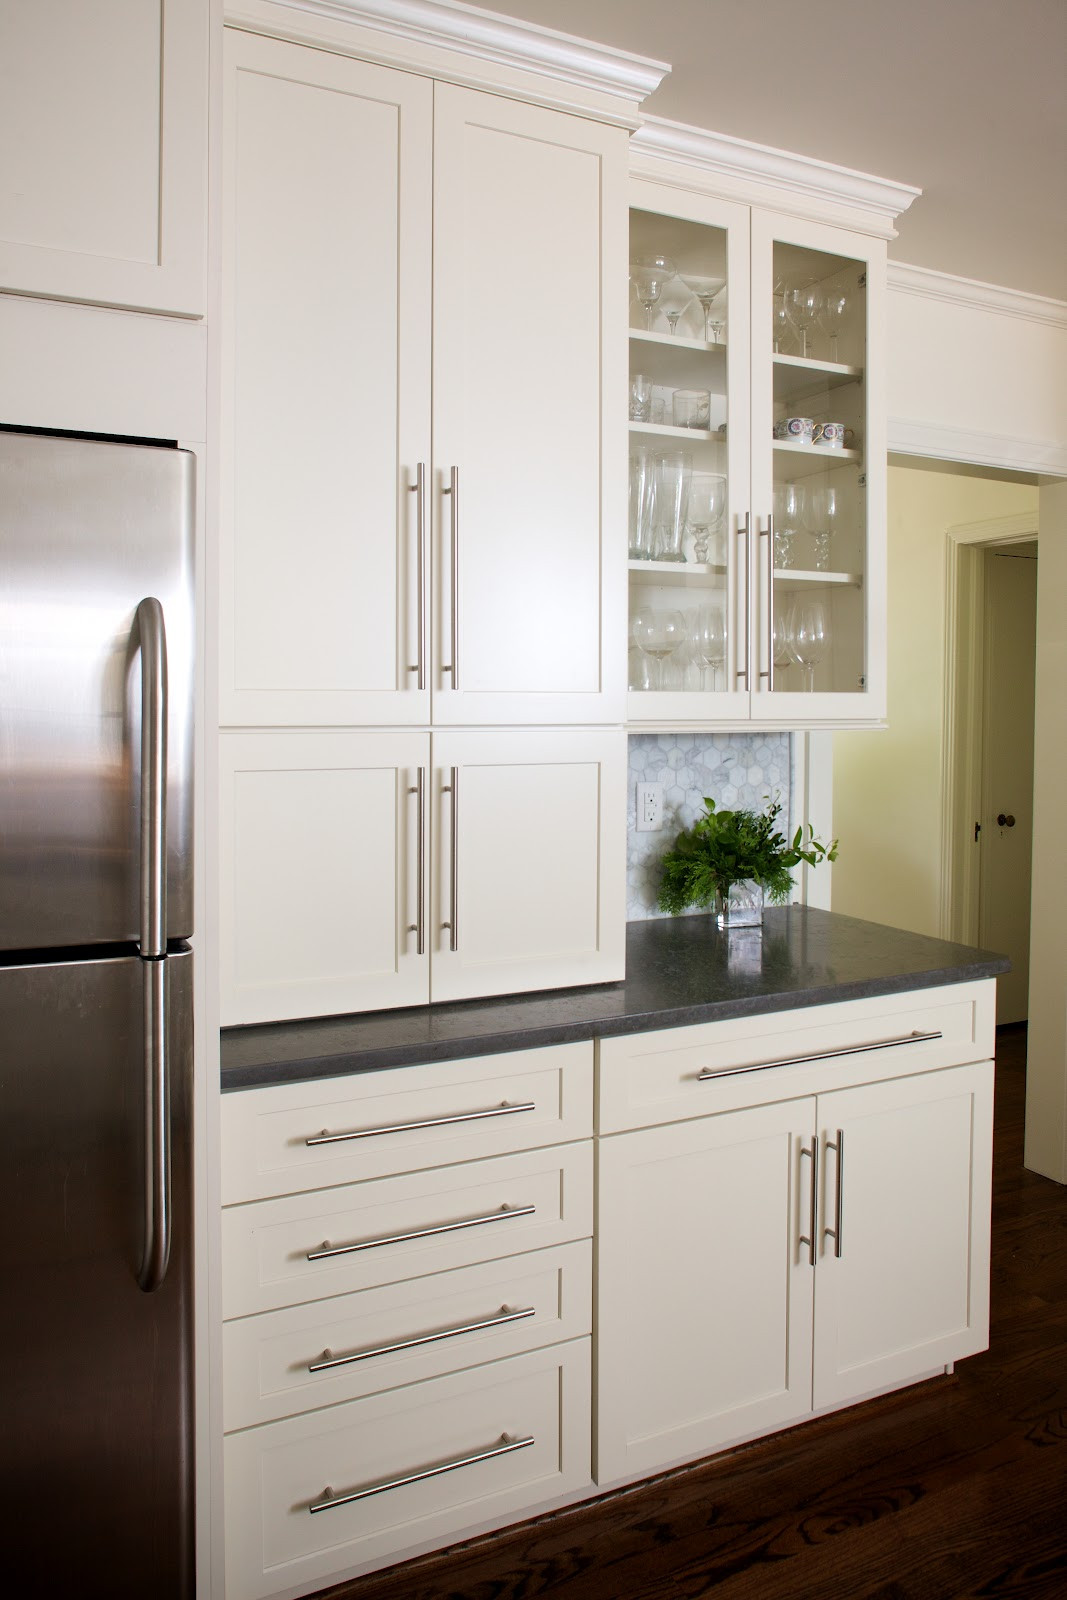 White Kitchen Cabinet Handles
 Haven and Home Client Kitchen